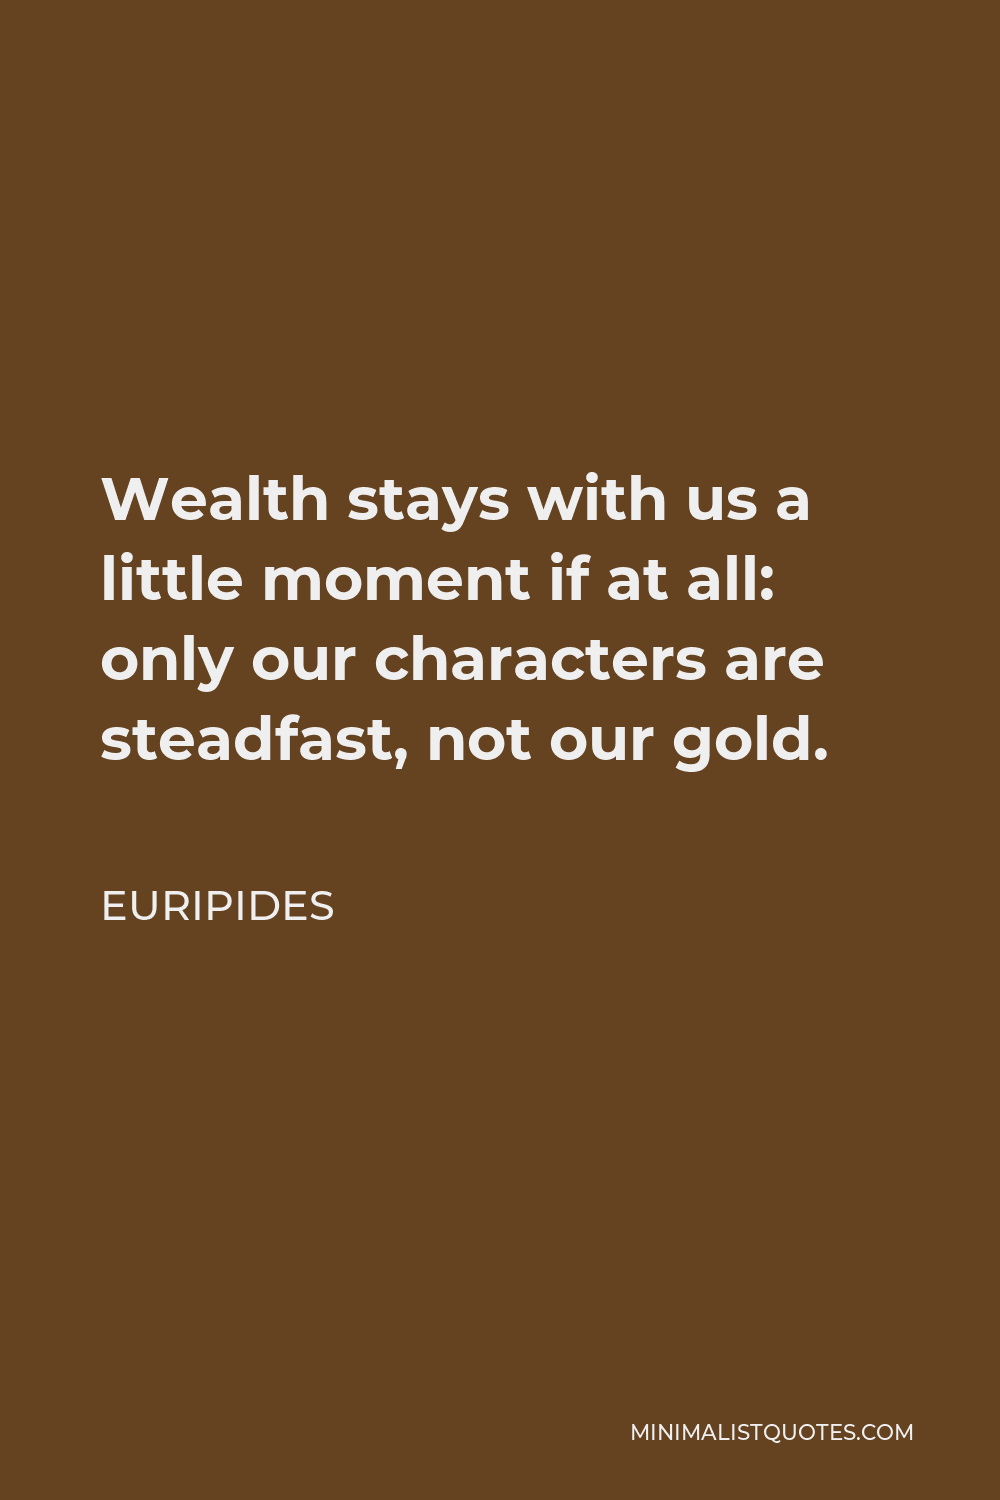 Euripides Quote - Wealth stays with us a little moment if at all: only our characters are steadfast, not our gold.